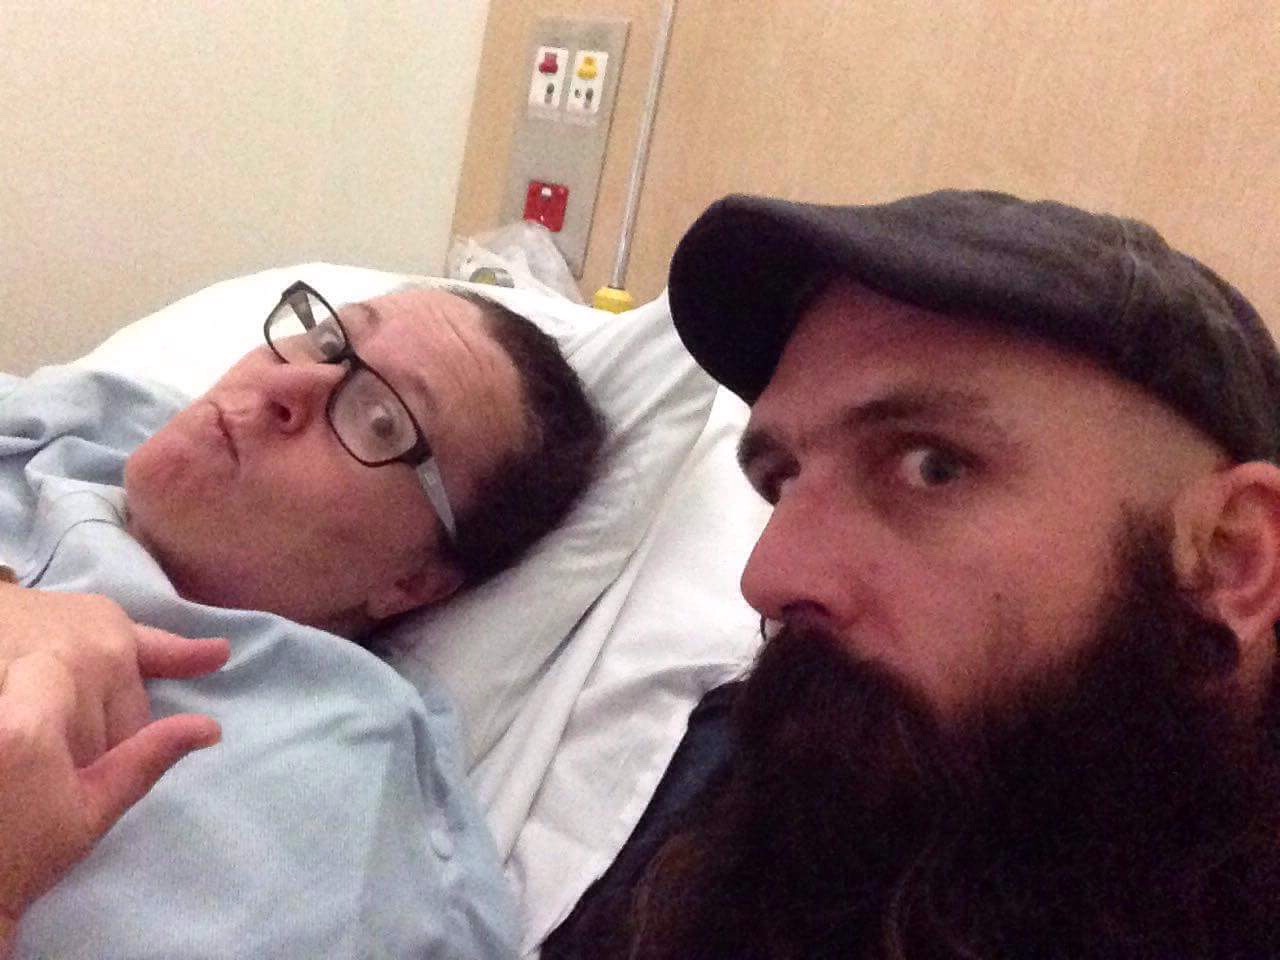 A woman on a bed in a hospital gown gives a thumbs up with a bearded man in a dark hat